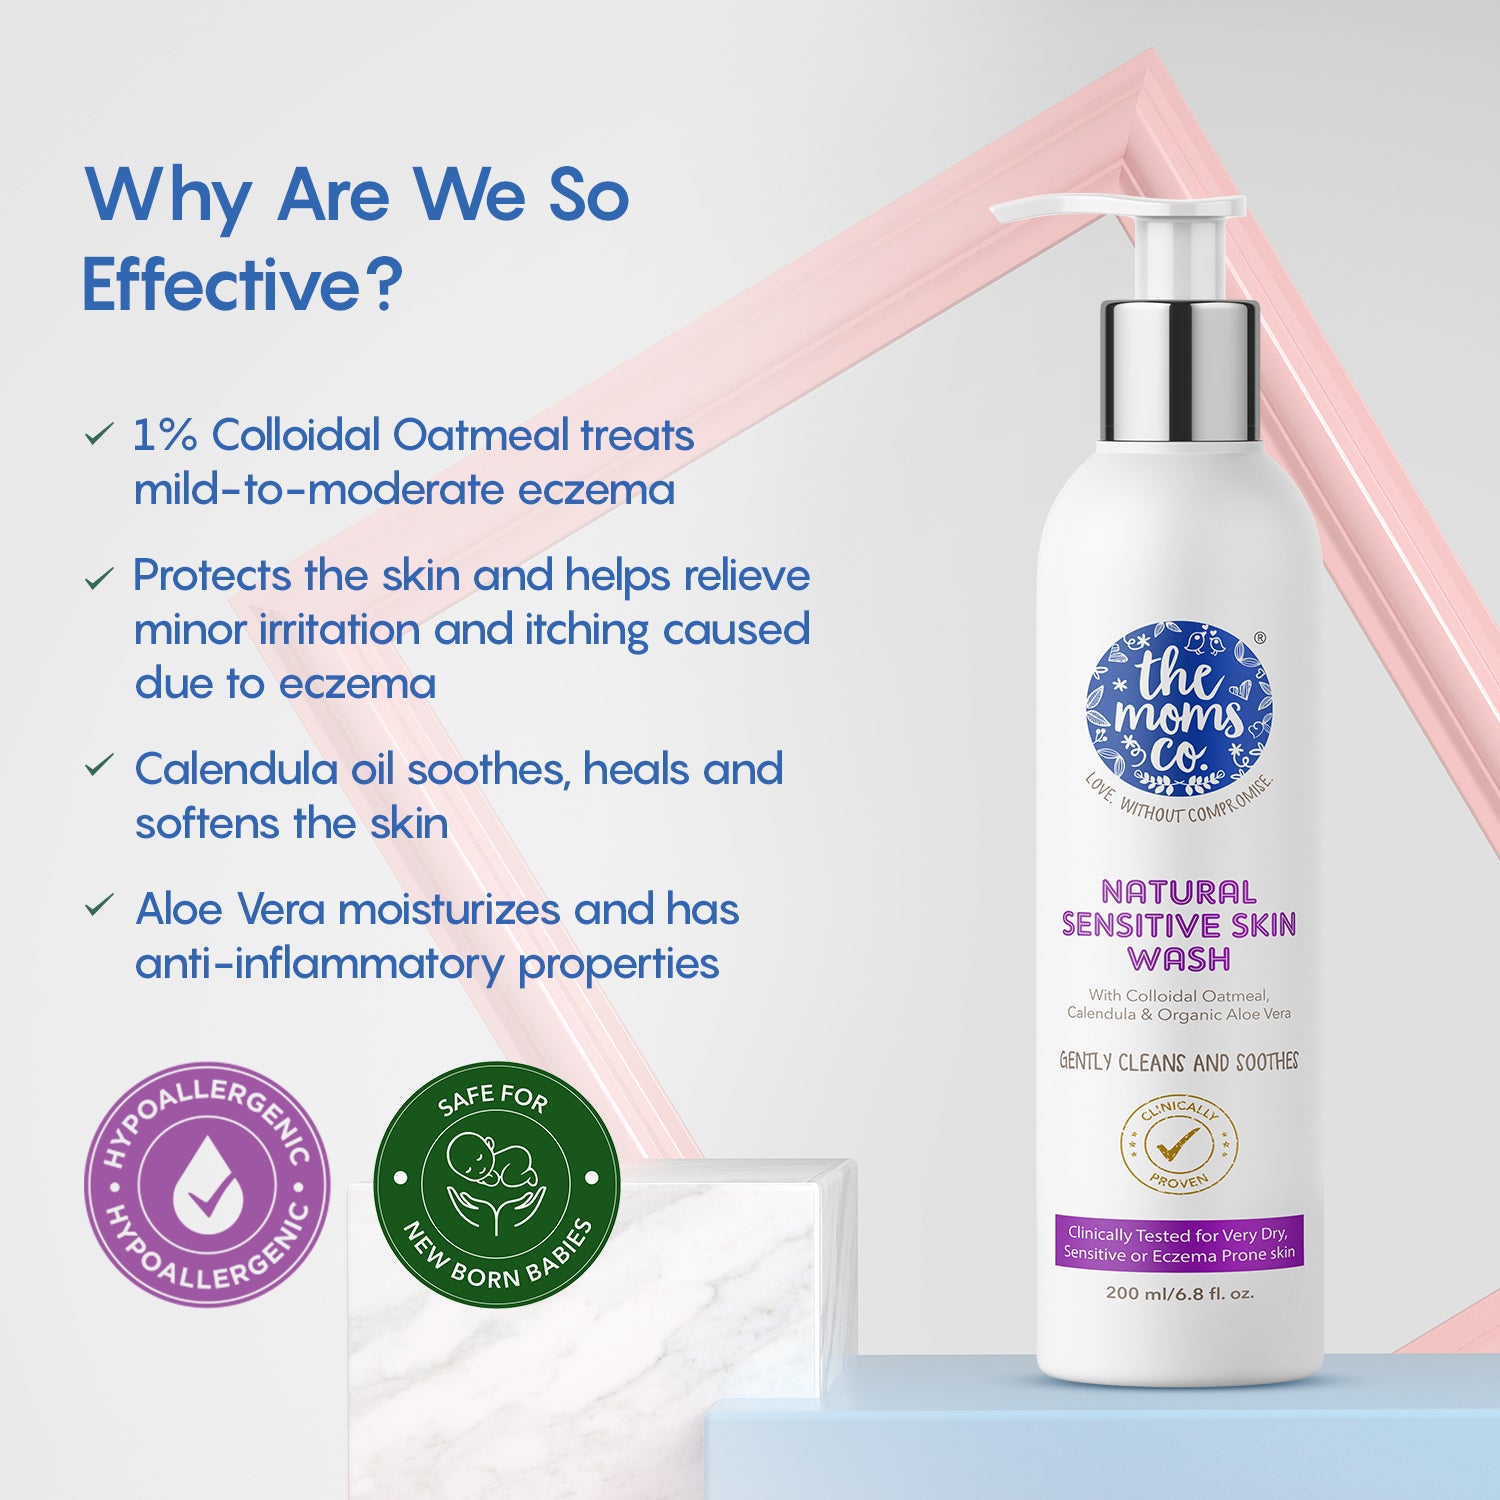 The Moms Co. Natural Sensitive Skin Wash - Very Dry, Sensitive or Itchy Skin Wash with Daily Moisturizing for Very Dry, Redness or Rashes Prone Skin 200ml